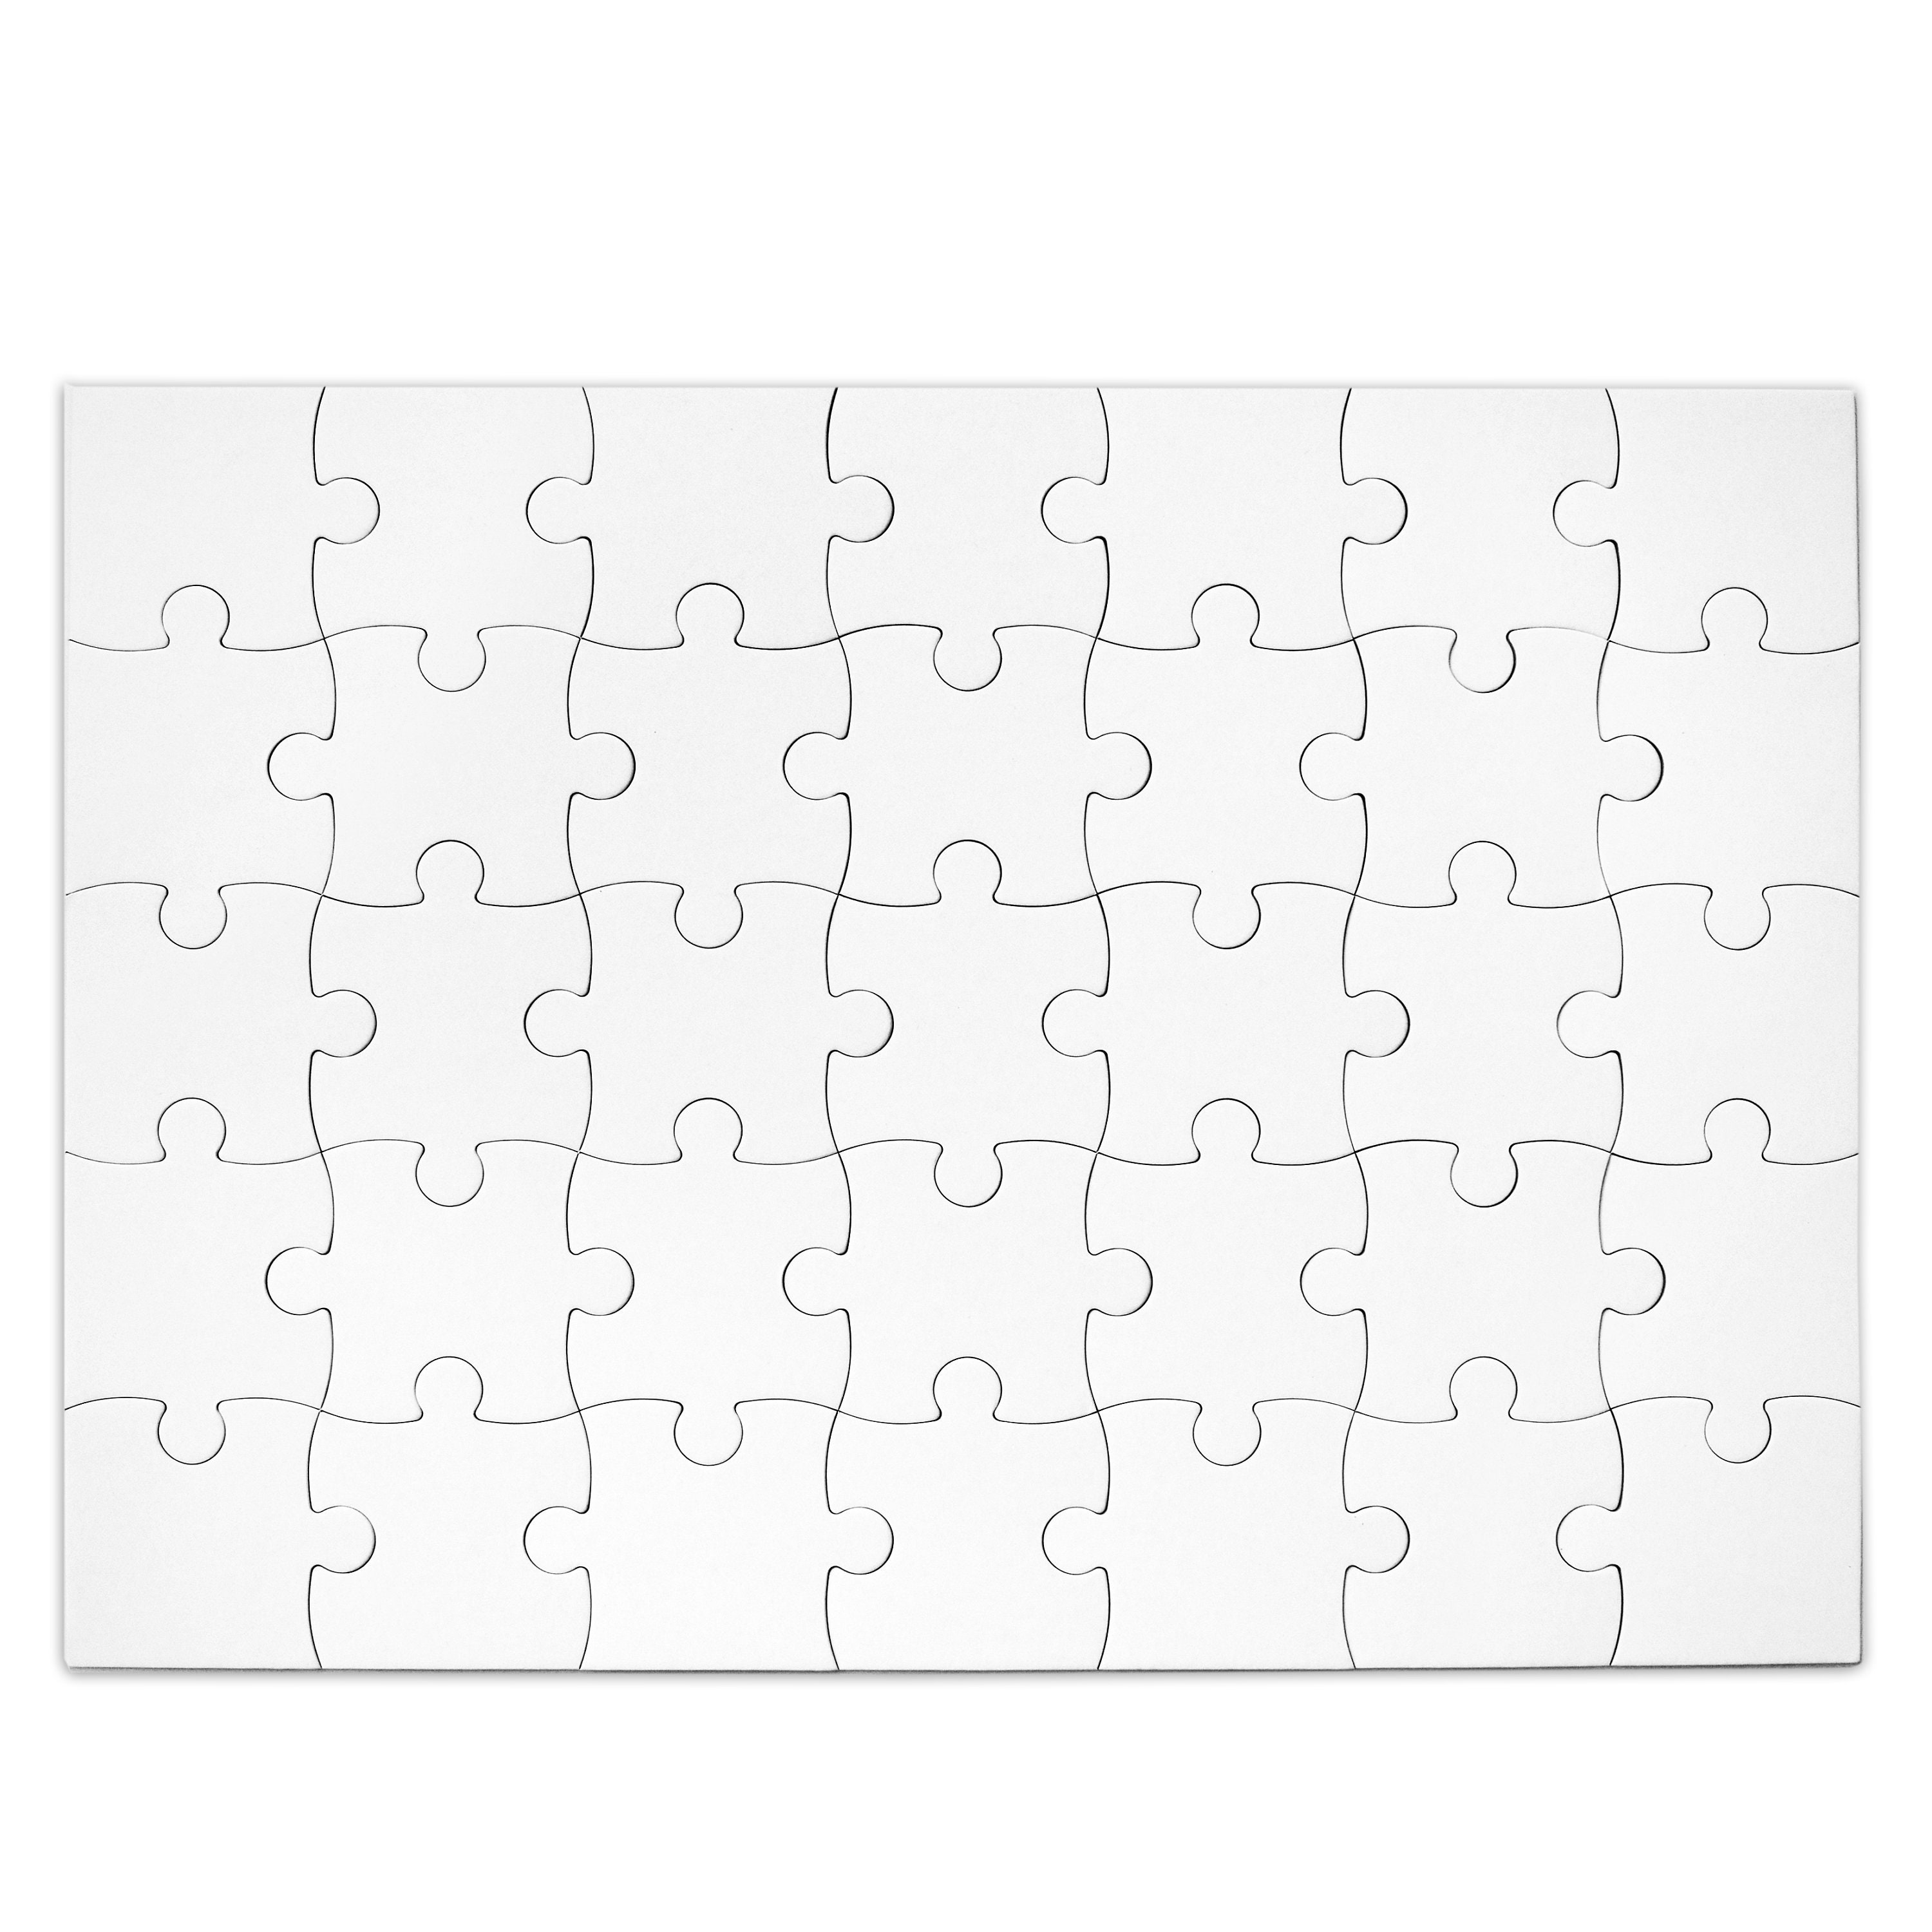 craftshou 140 Pcs 9.45 inch White Blank Puzzle Pieces Oversize Puzzles Squre Large Puzzle Papers to Draw on for DIY Decorating Boys Girls Art